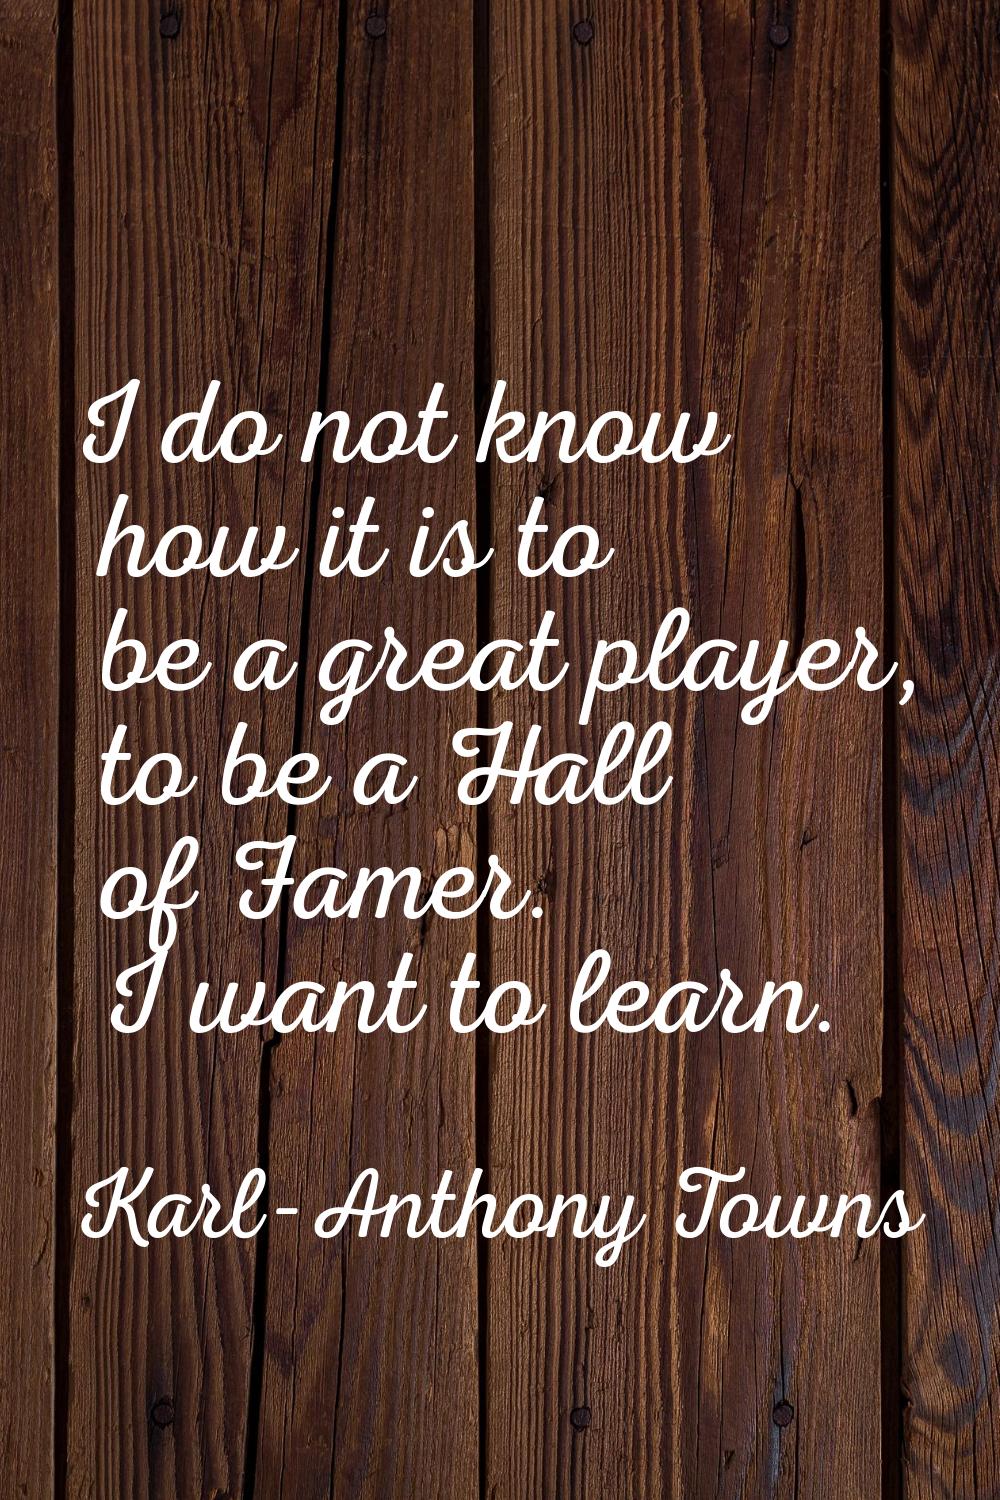 I do not know how it is to be a great player, to be a Hall of Famer. I want to learn.